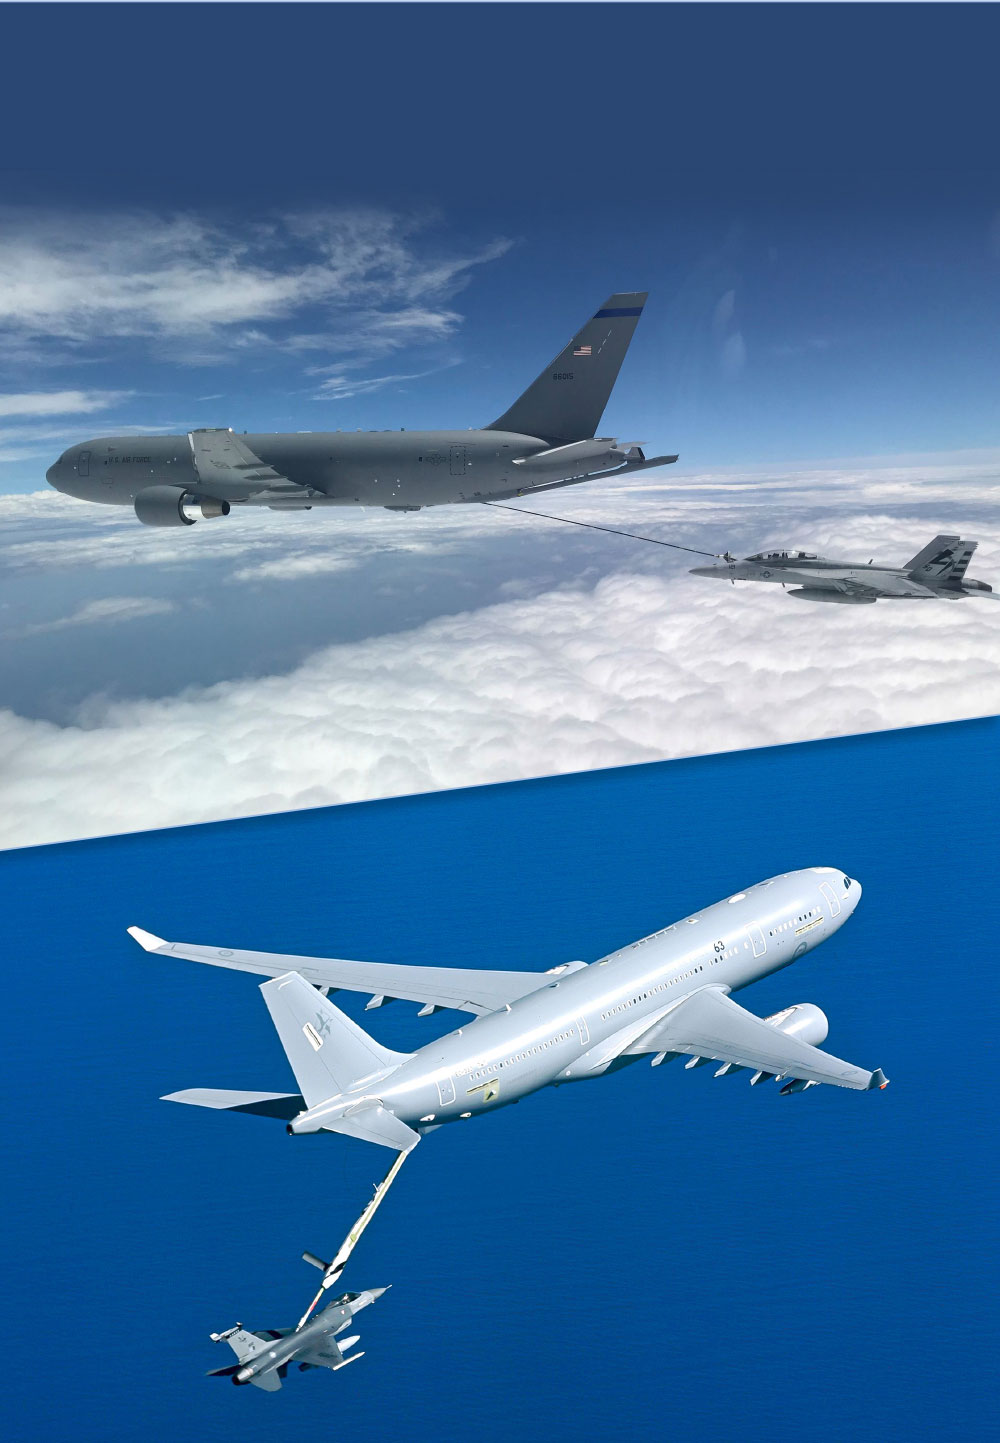 A Look at TurAF’s Aerial Refueling Aircraft Capabilitiy & Potential Candidates to Replace its Aging Tanker Fleet